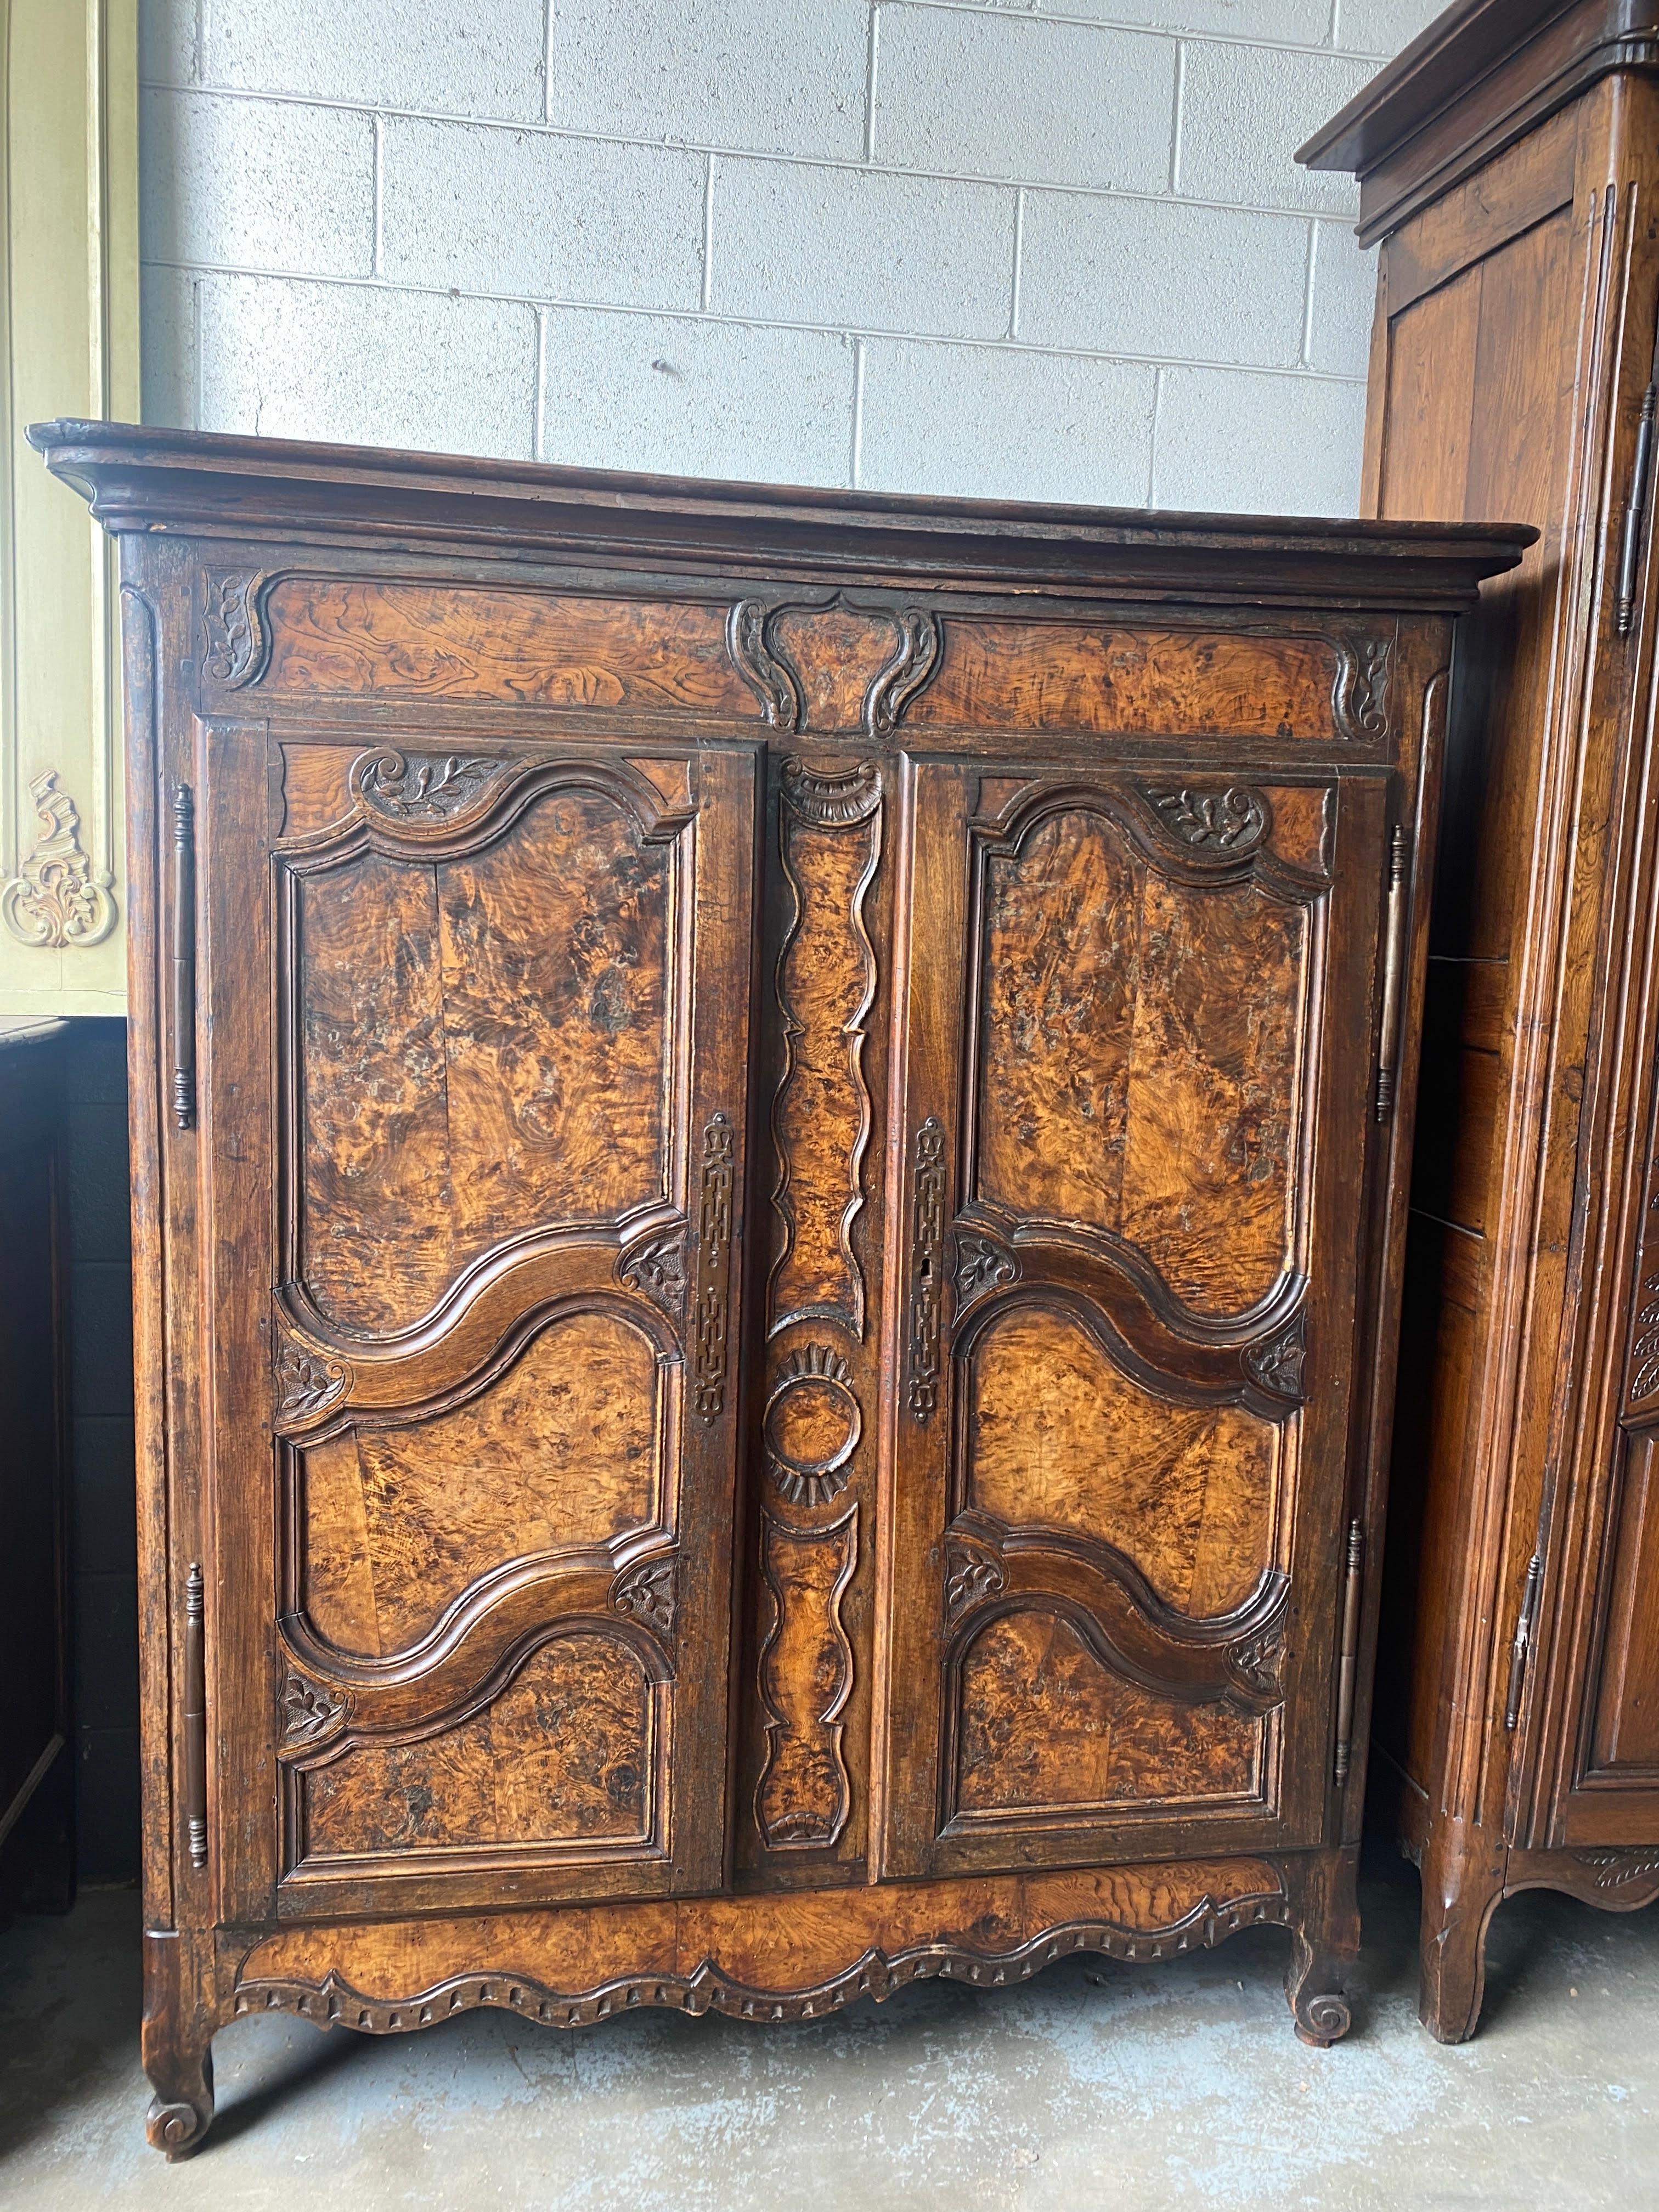 Beautiful antique armoire French Provincial Louis XV burled walnut and walnut with three adjustable interior shelves, late 1700's, 18th Century. This 18th c. This French burled walnut armoire is rare find because of the size and the burled walnut.